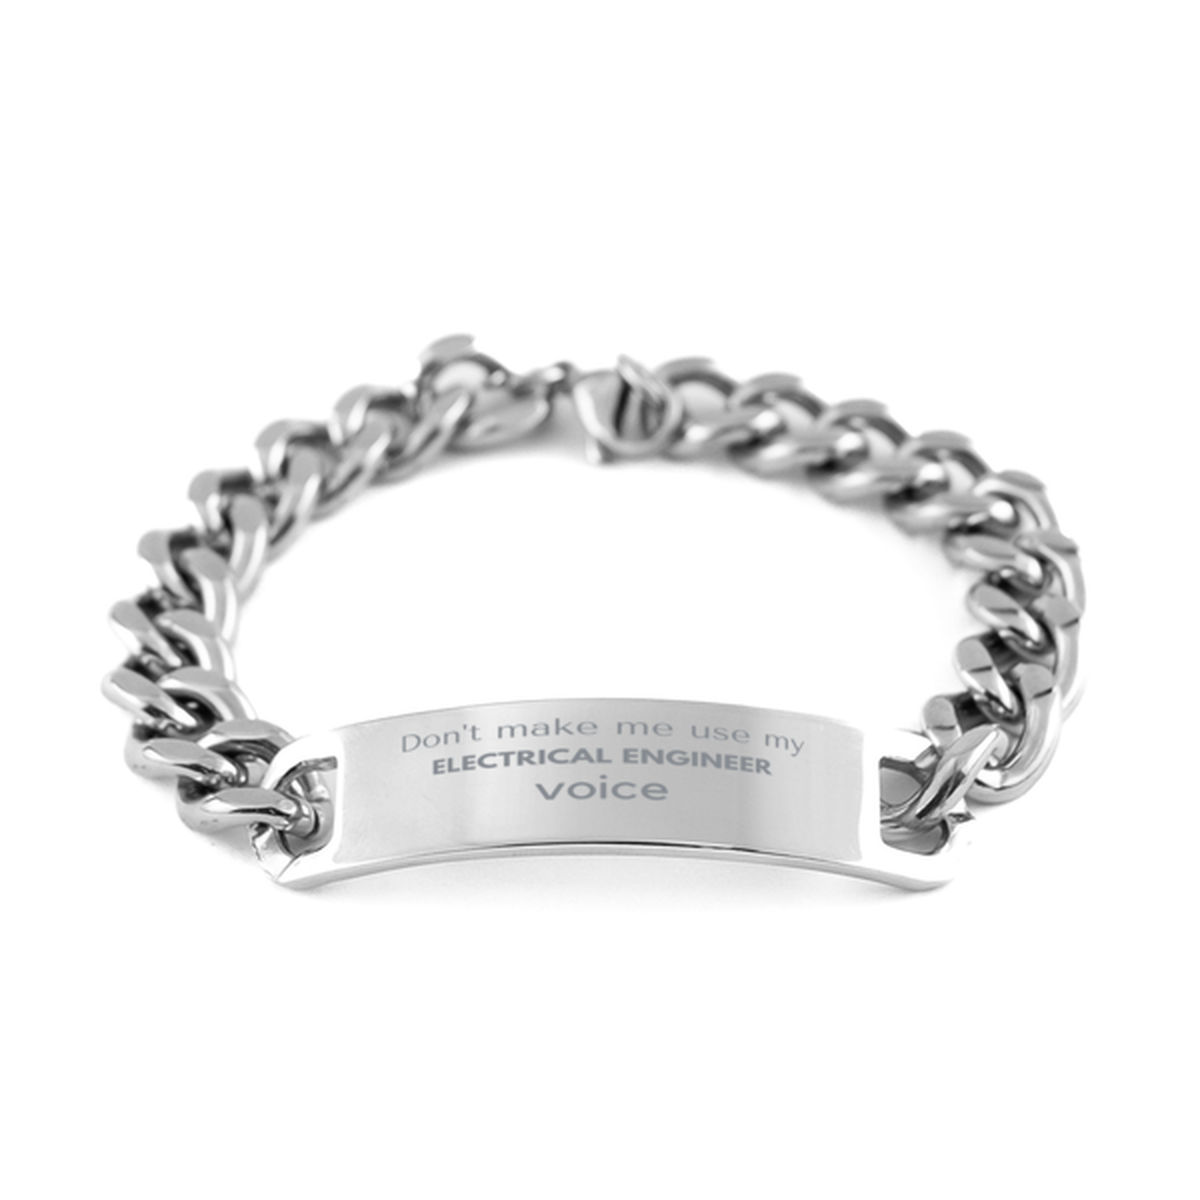 Don't make me use my Electrical Engineer voice, Sarcasm Electrical Engineer Gifts, Christmas Electrical Engineer Cuban Chain Stainless Steel Bracelet Birthday Unique Gifts For Electrical Engineer Coworkers, Men, Women, Colleague, Friends